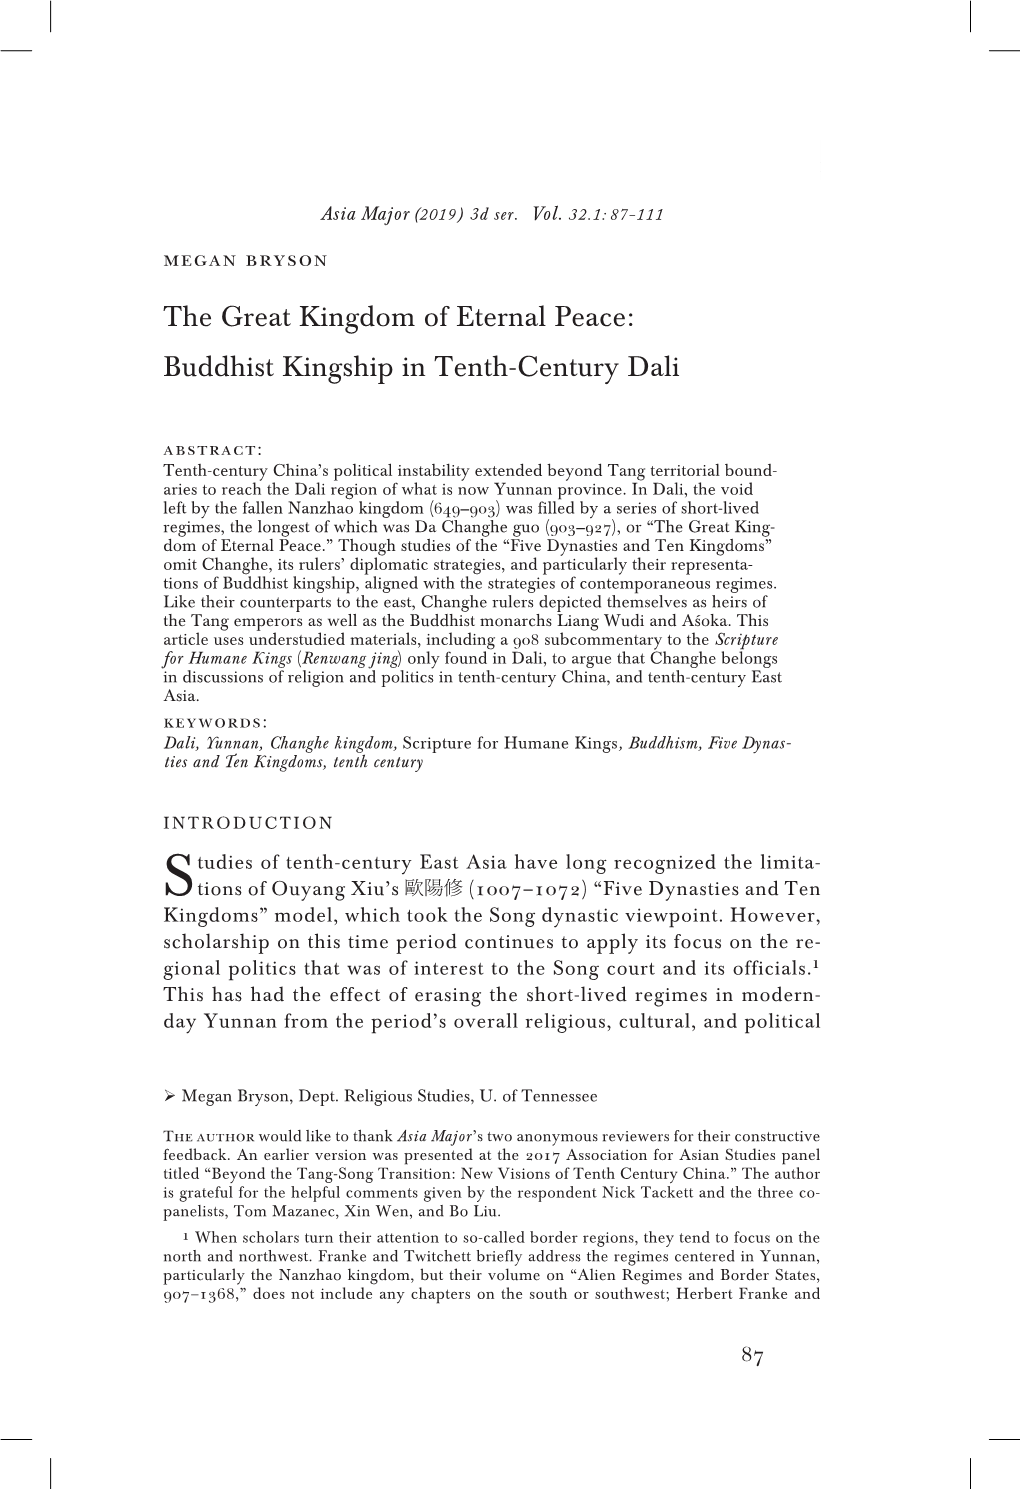 The Great Kingdom of Eternal Peace: Buddhist Kingship in Tenth-Century Dali